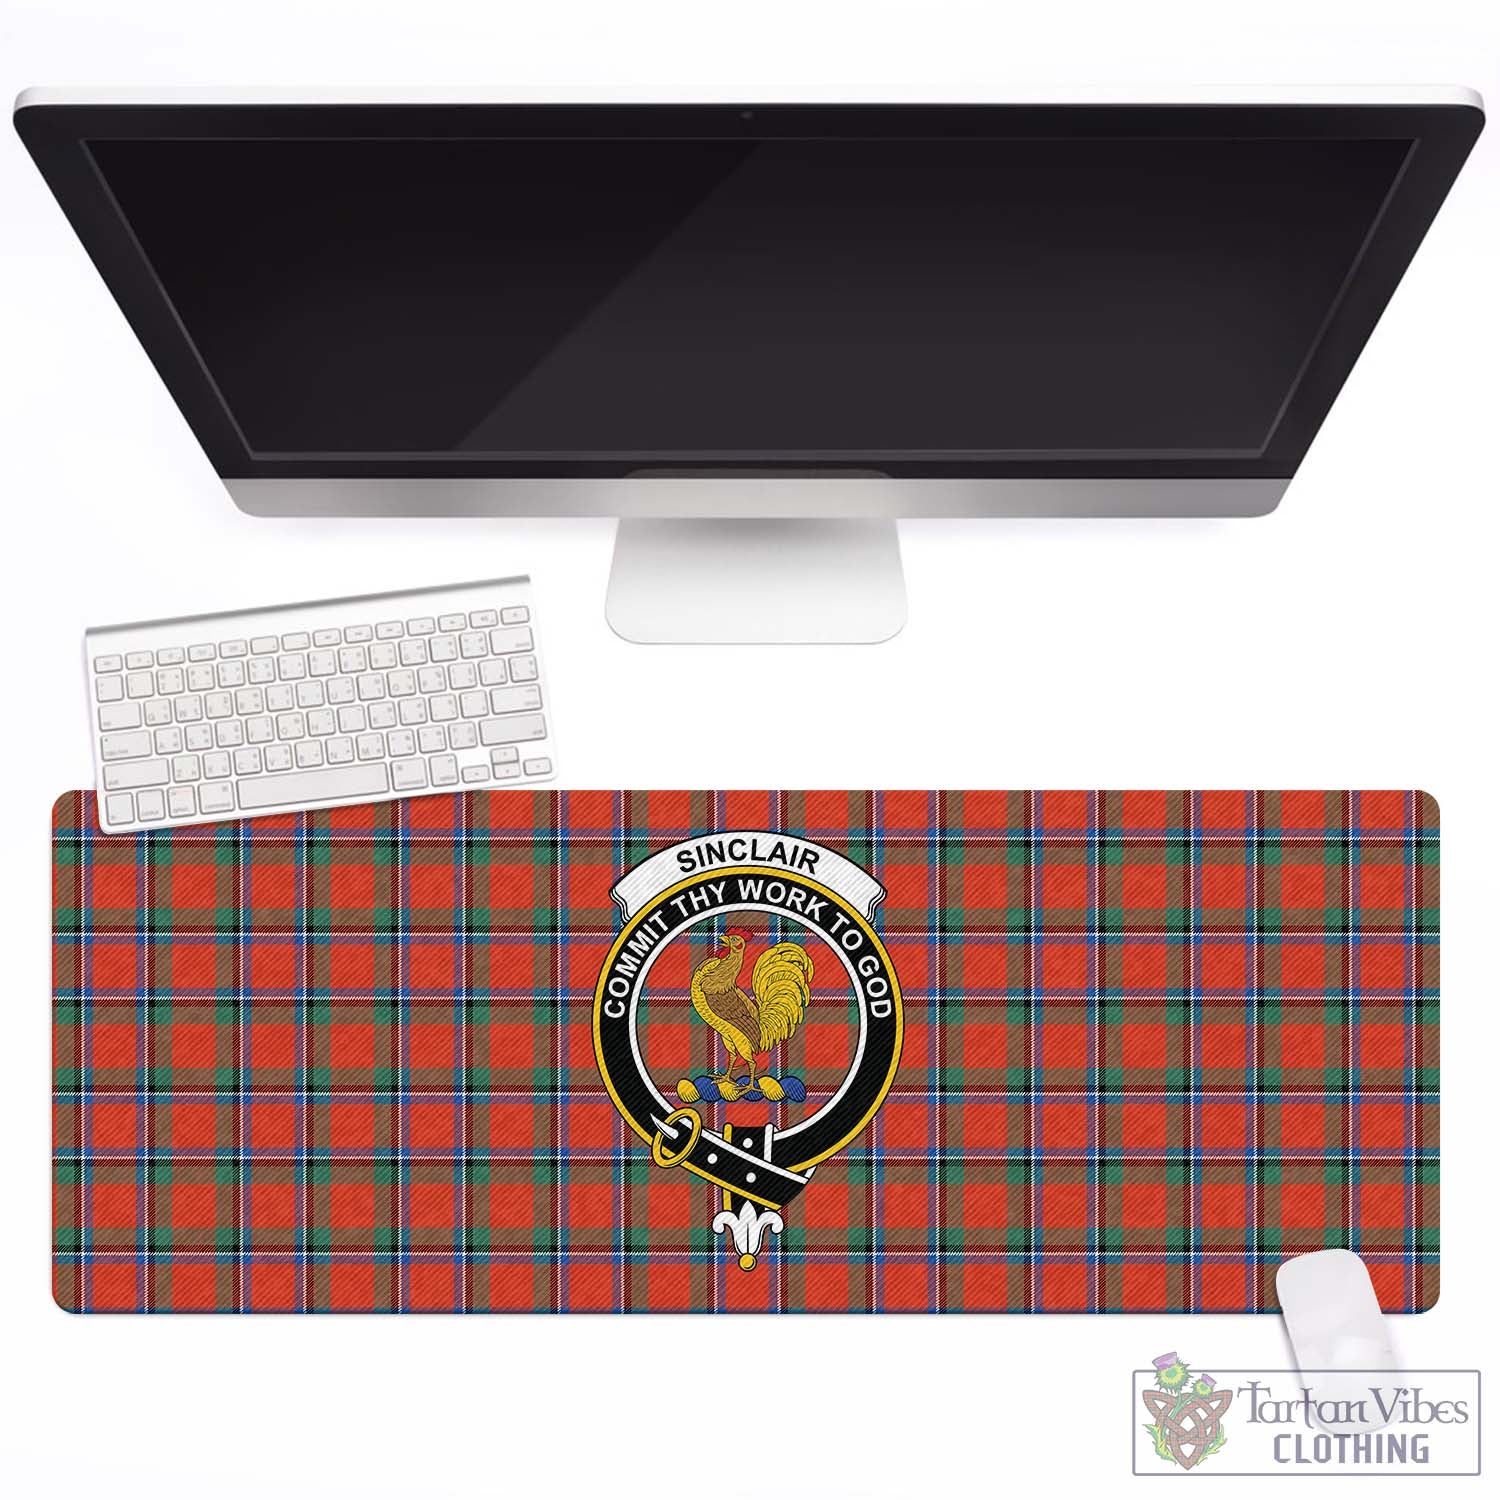 Tartan Vibes Clothing Sinclair Ancient Tartan Mouse Pad with Family Crest